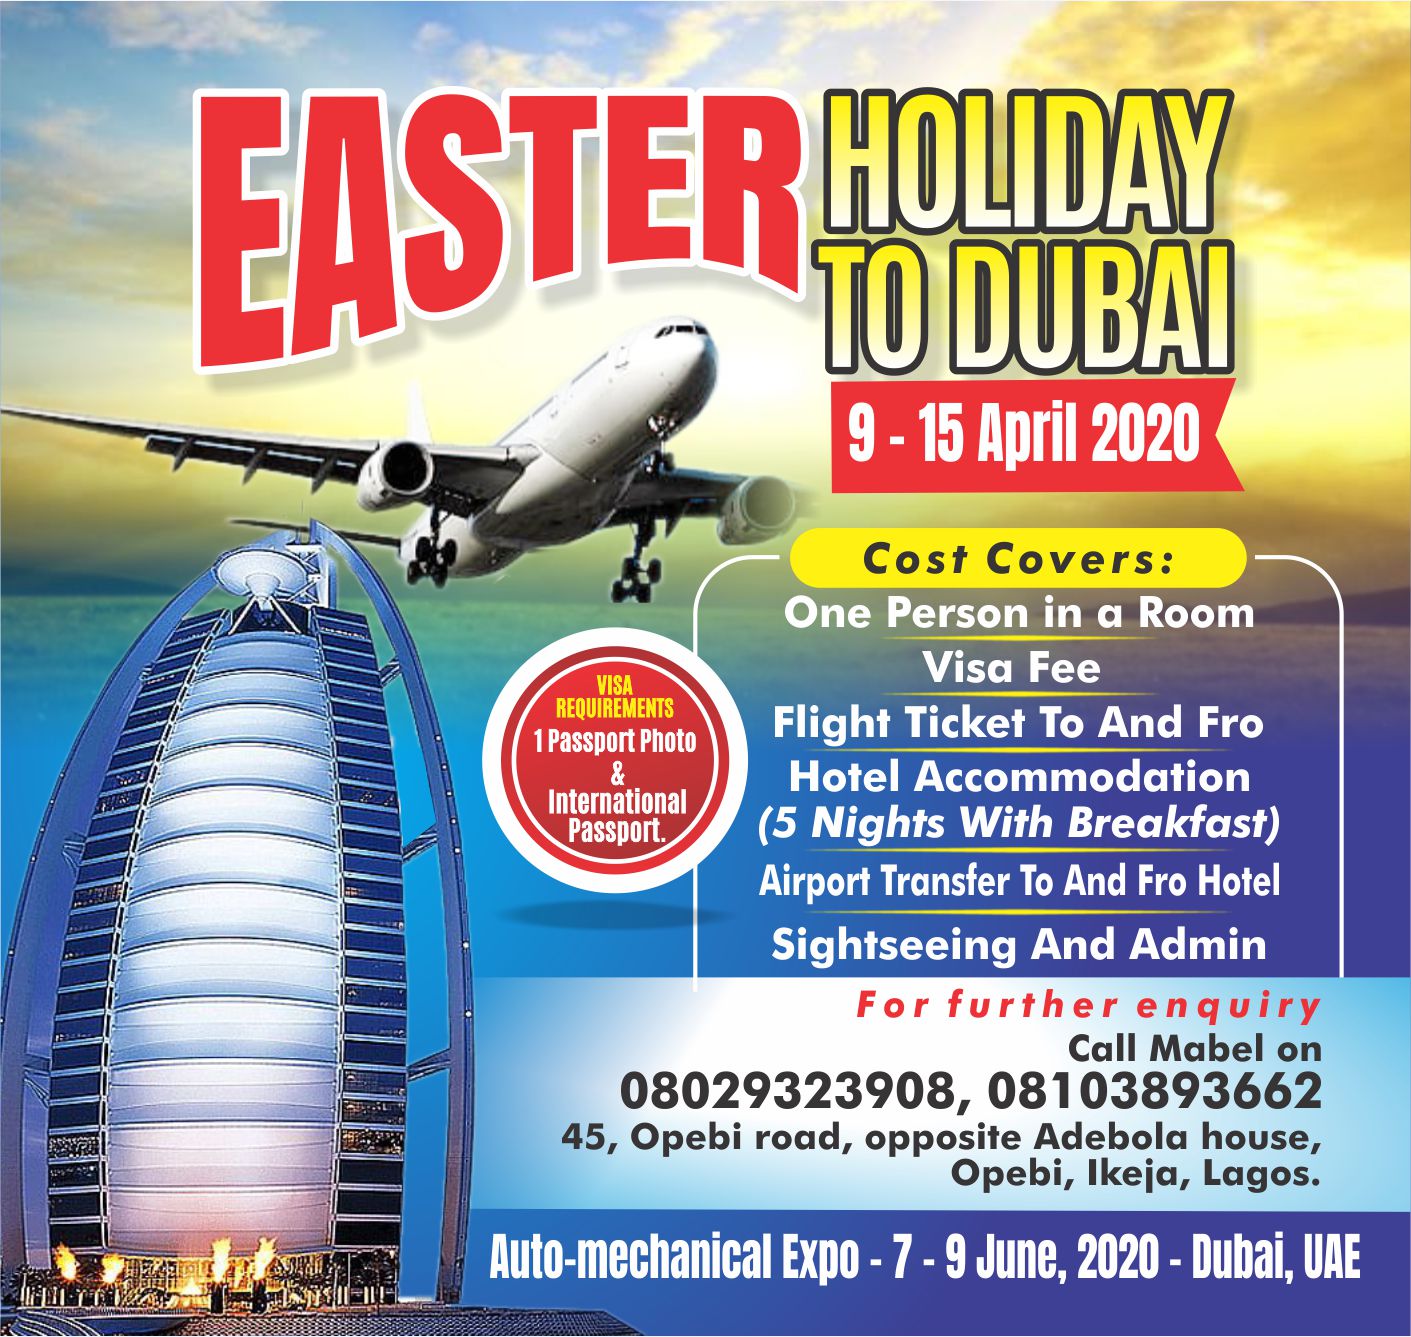 JOIN US ON EASTER HOLIDAY TRIP TO DUBAI